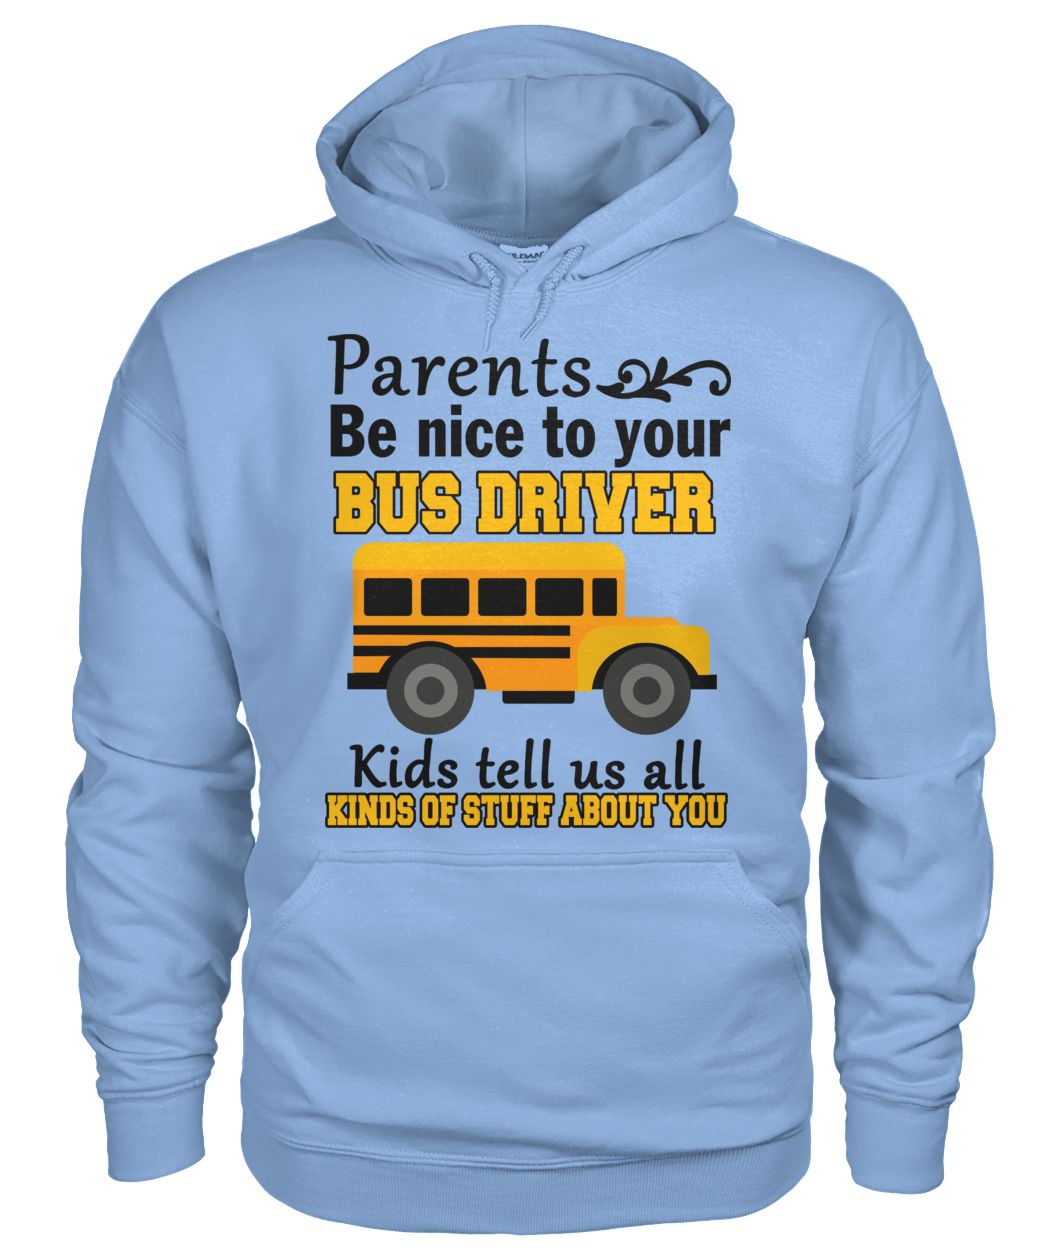 Parents be nice to the bus driver kids tell us all kind of stuff about you gildan hoodie